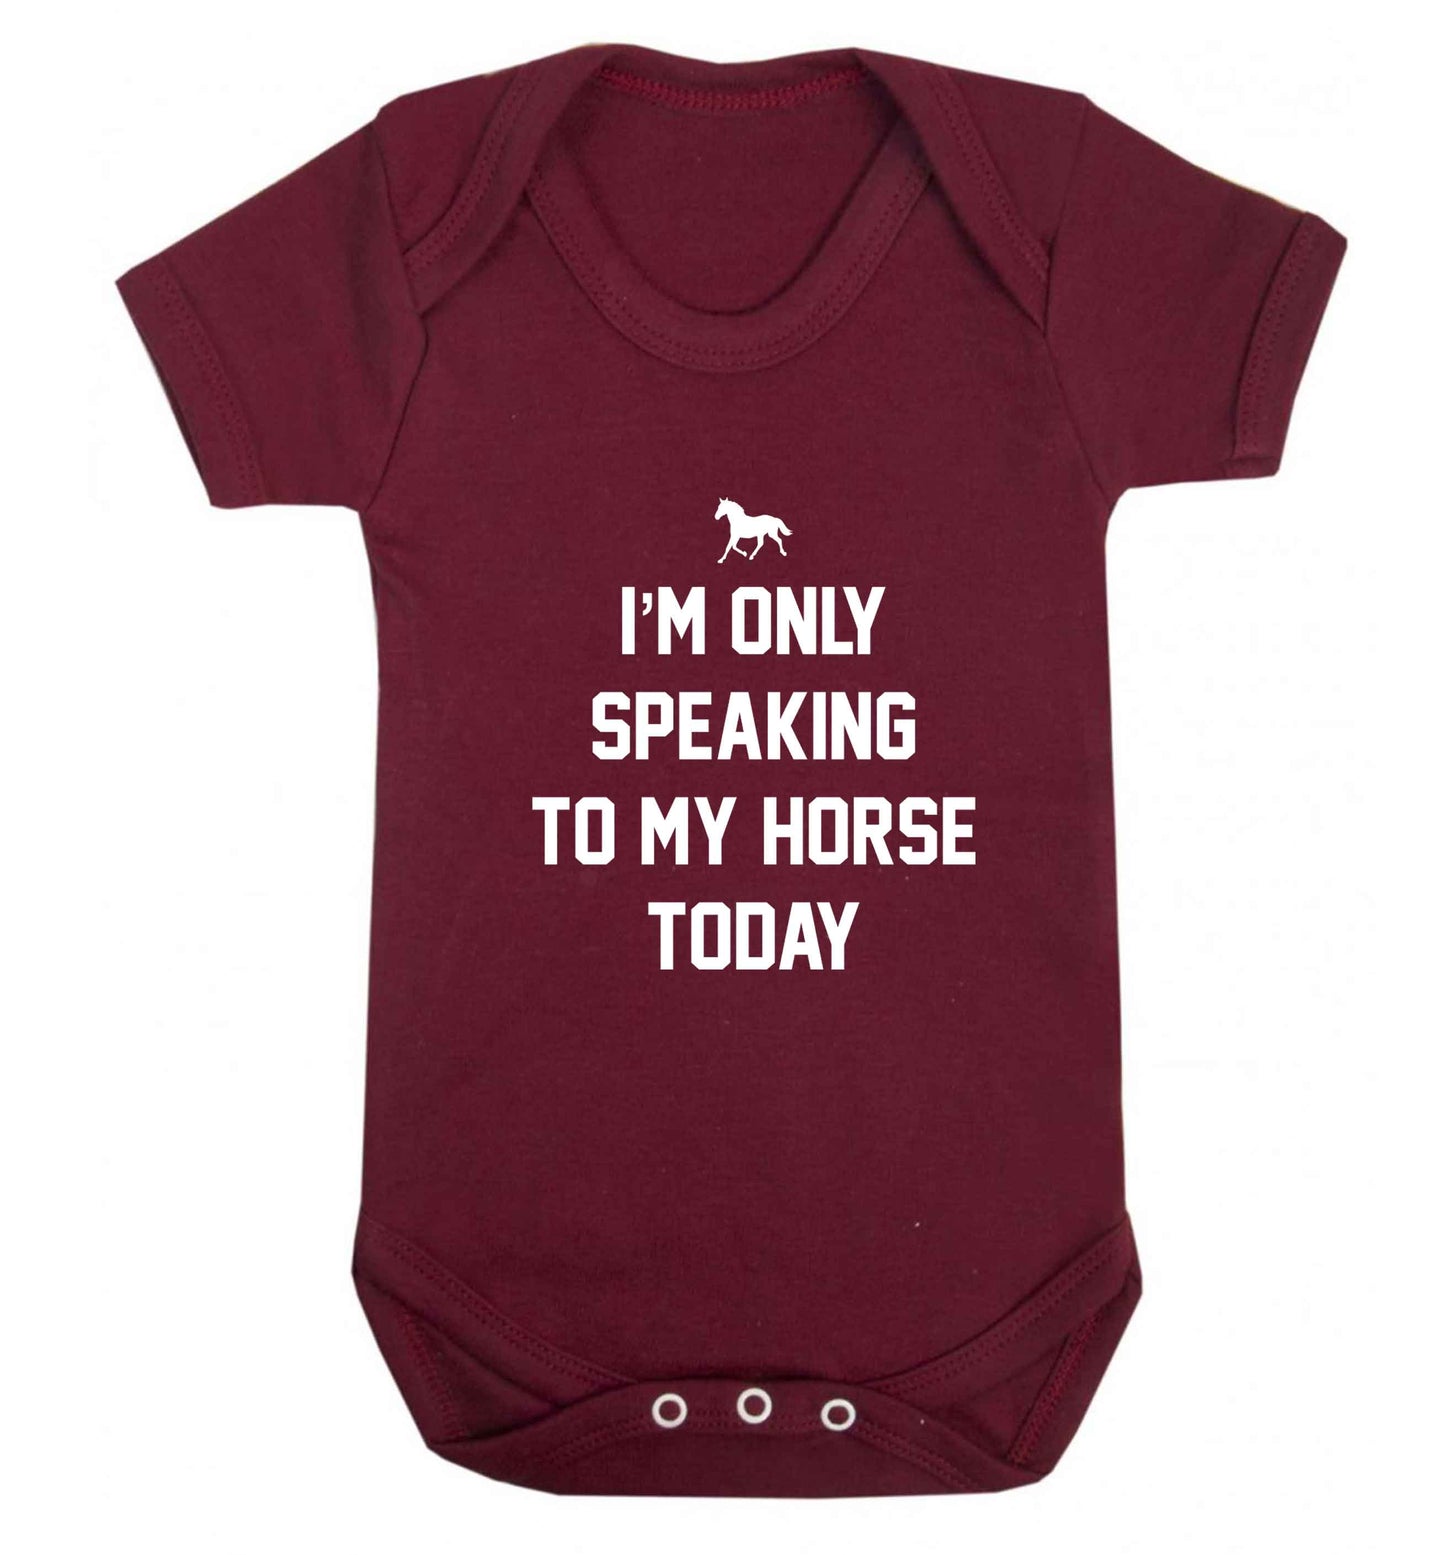 I'm only speaking to my horse today baby vest maroon 18-24 months